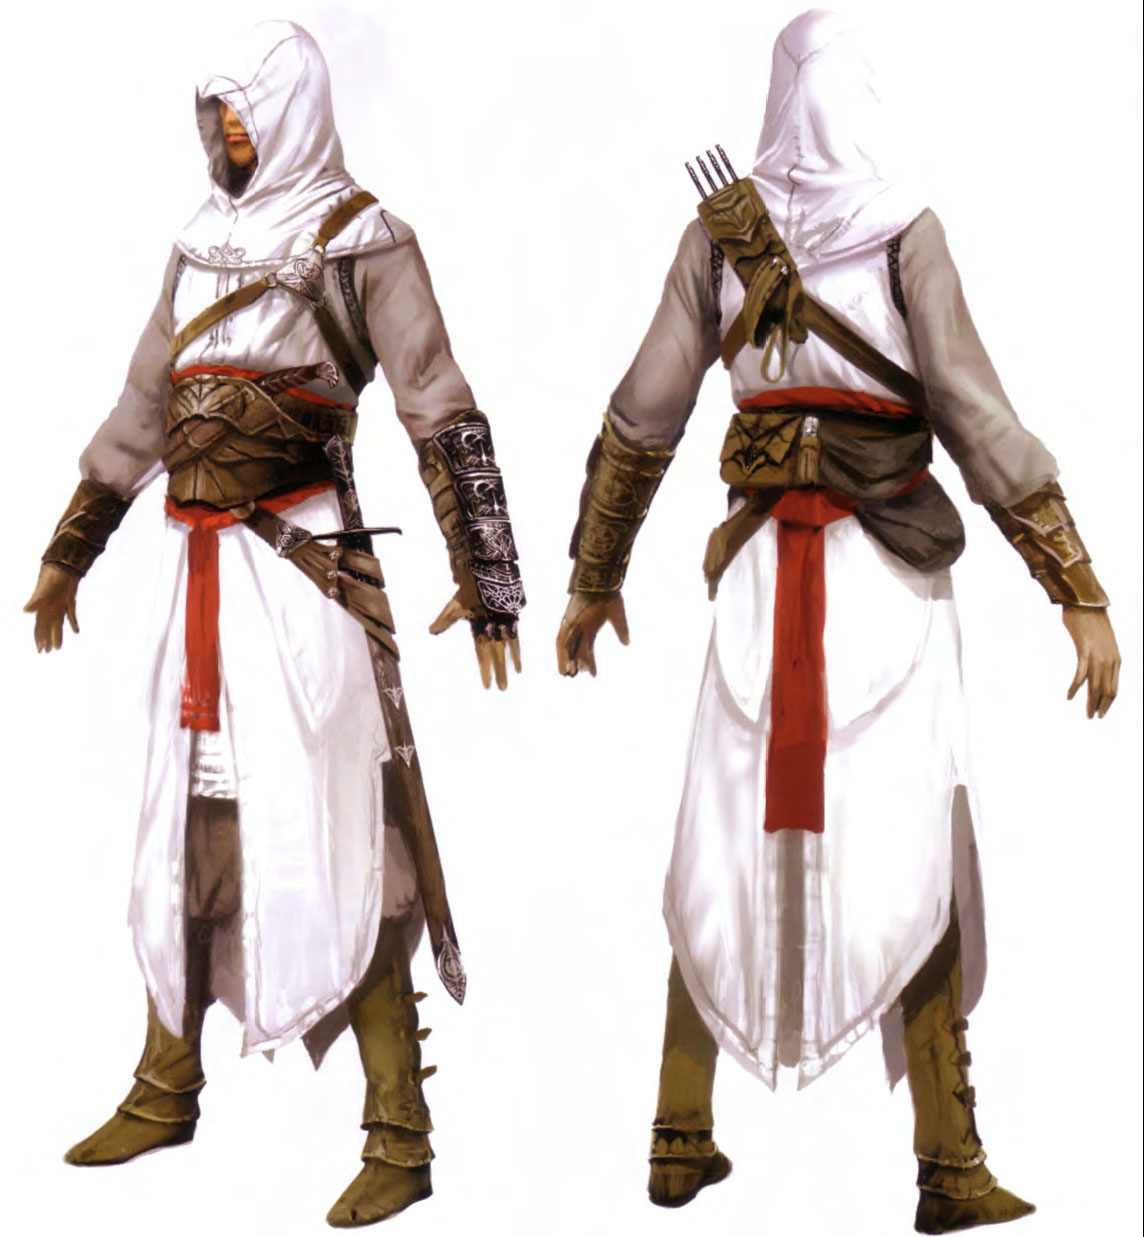 Altair Concept art in game